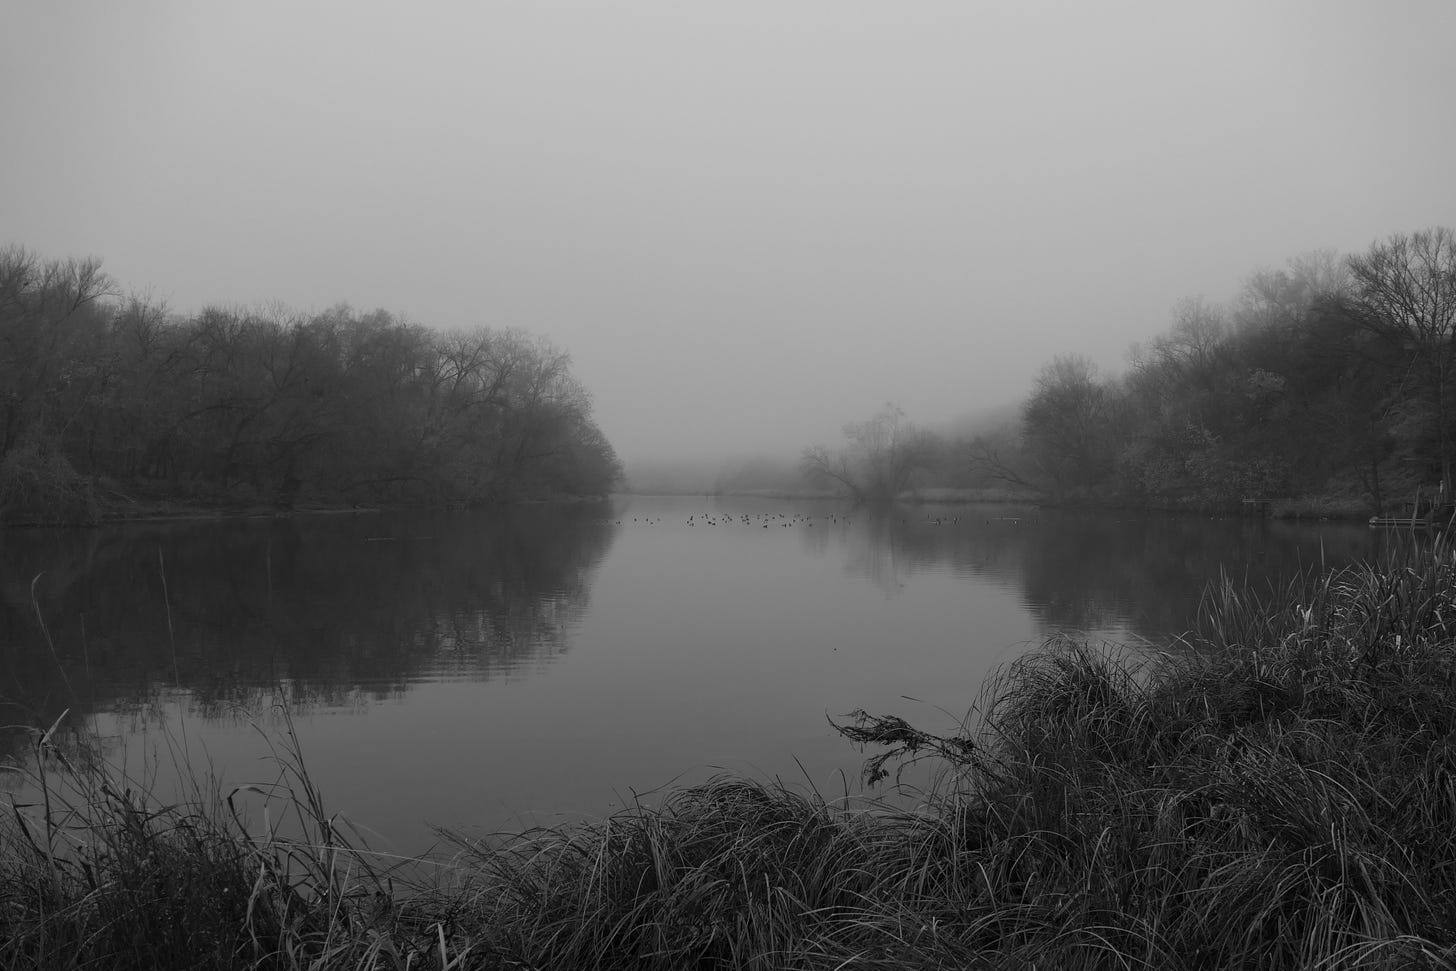 Black and white photo of river in fog, with water grass, trees, ducks, and the very faint profiles of two human figures